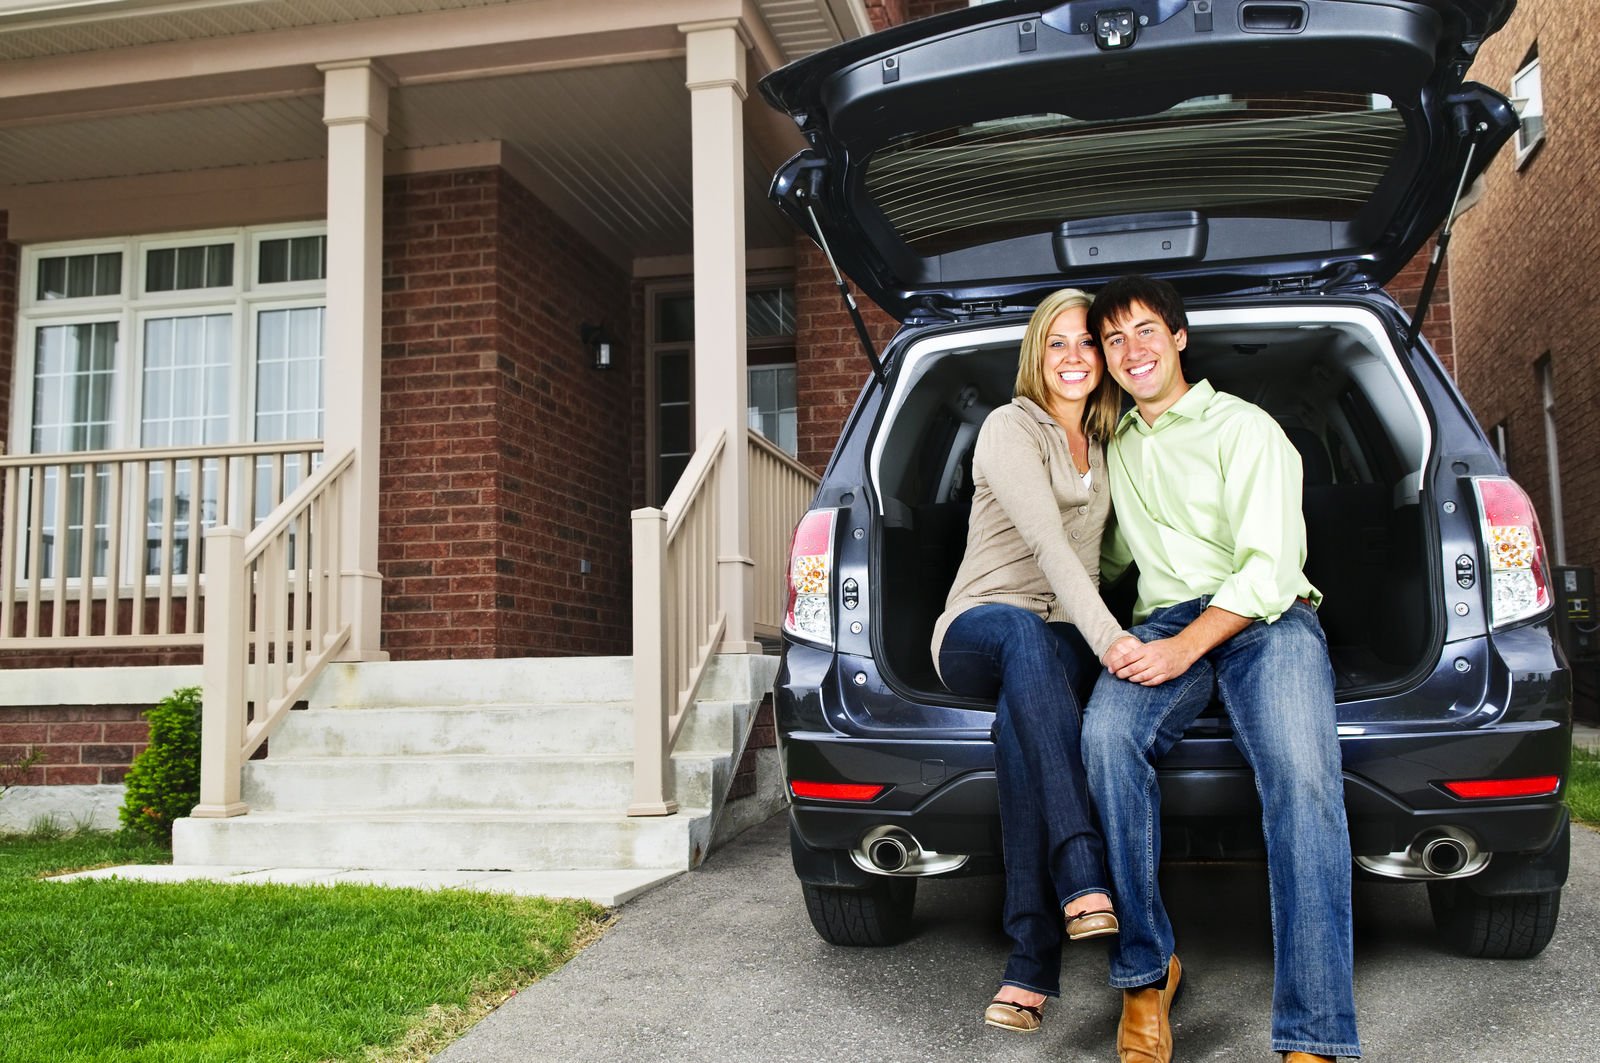 Can a married couple have separate car insurance policies?